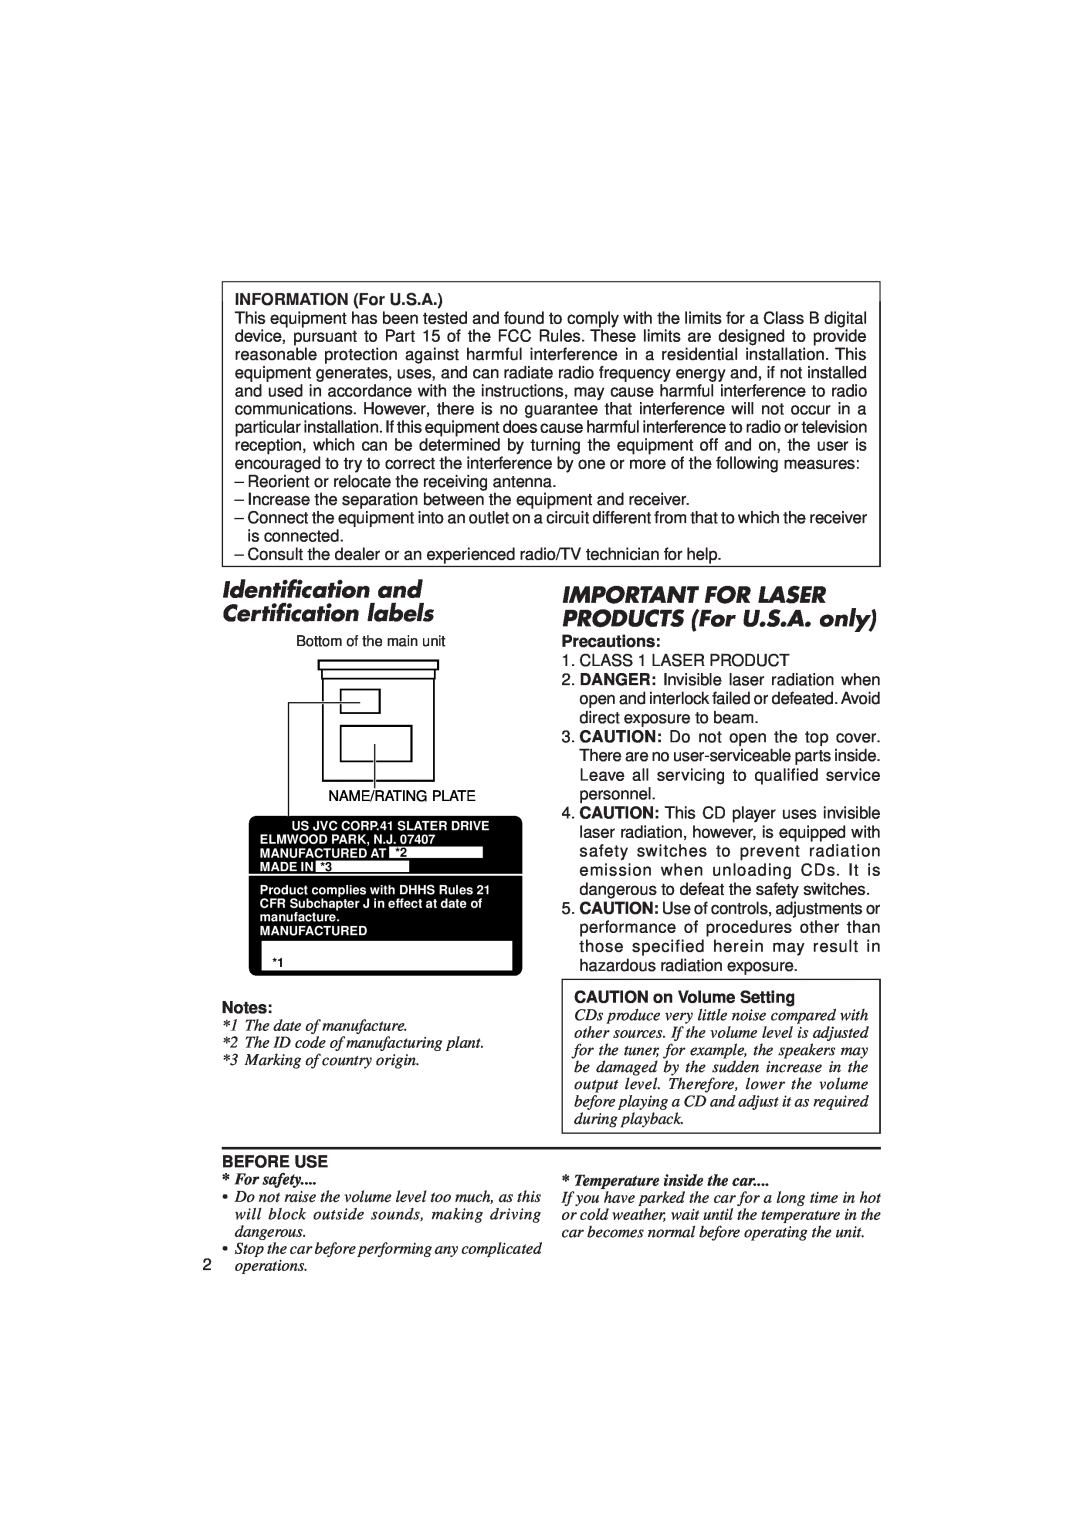 JVC KD-SX1000RJ manual INFORMATION For U.S.A, Precautions, CAUTION on Volume Setting, Before Use, For safety 